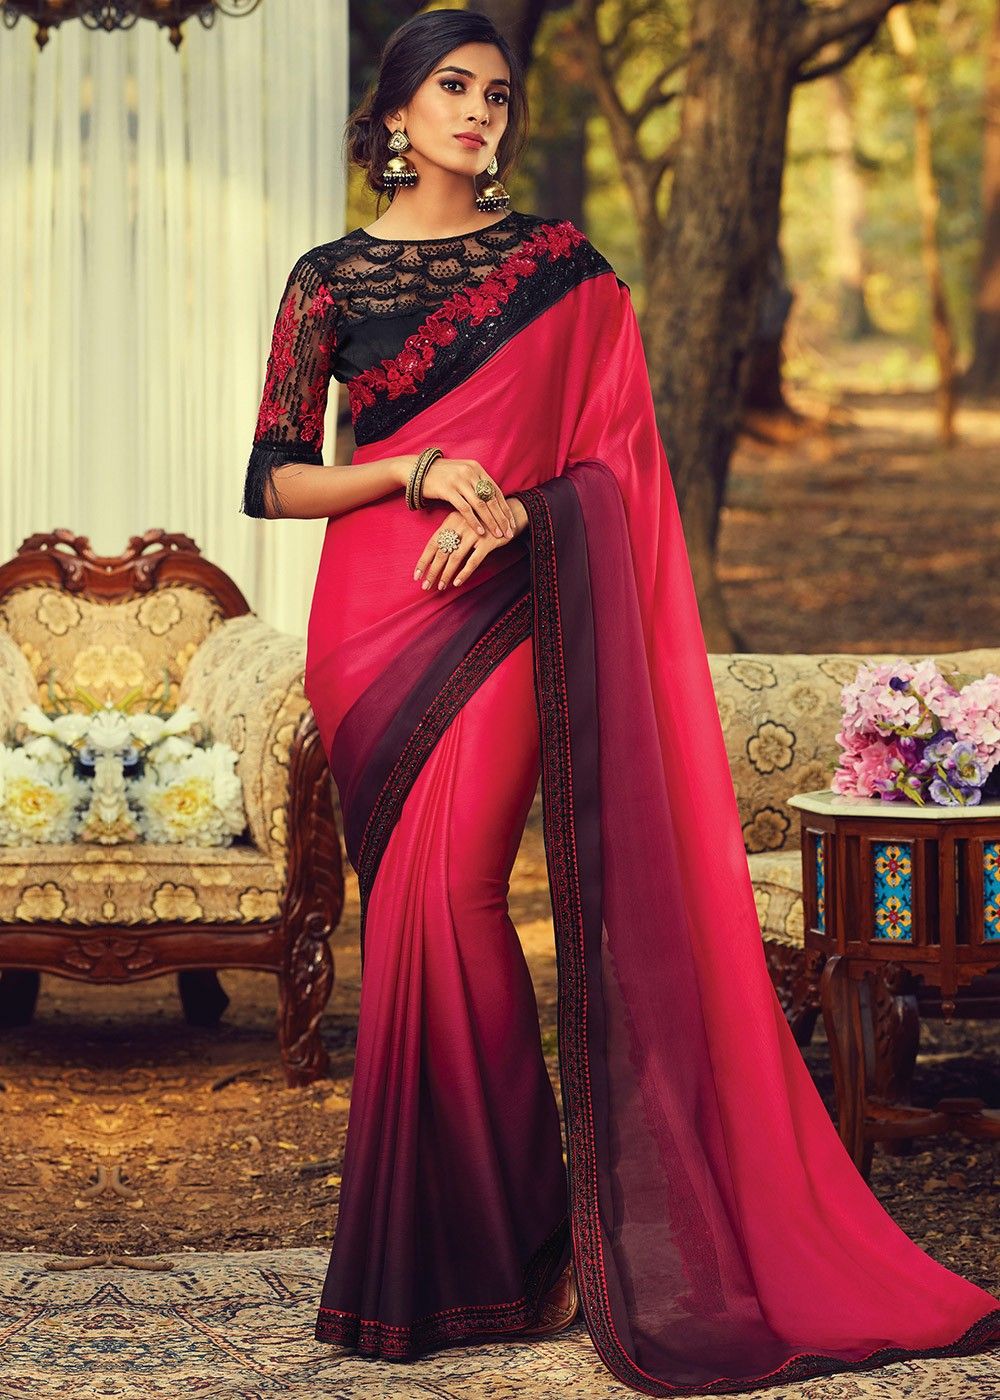 Pink Chiffon Saree With Black Blouse Piece For Women/Girls